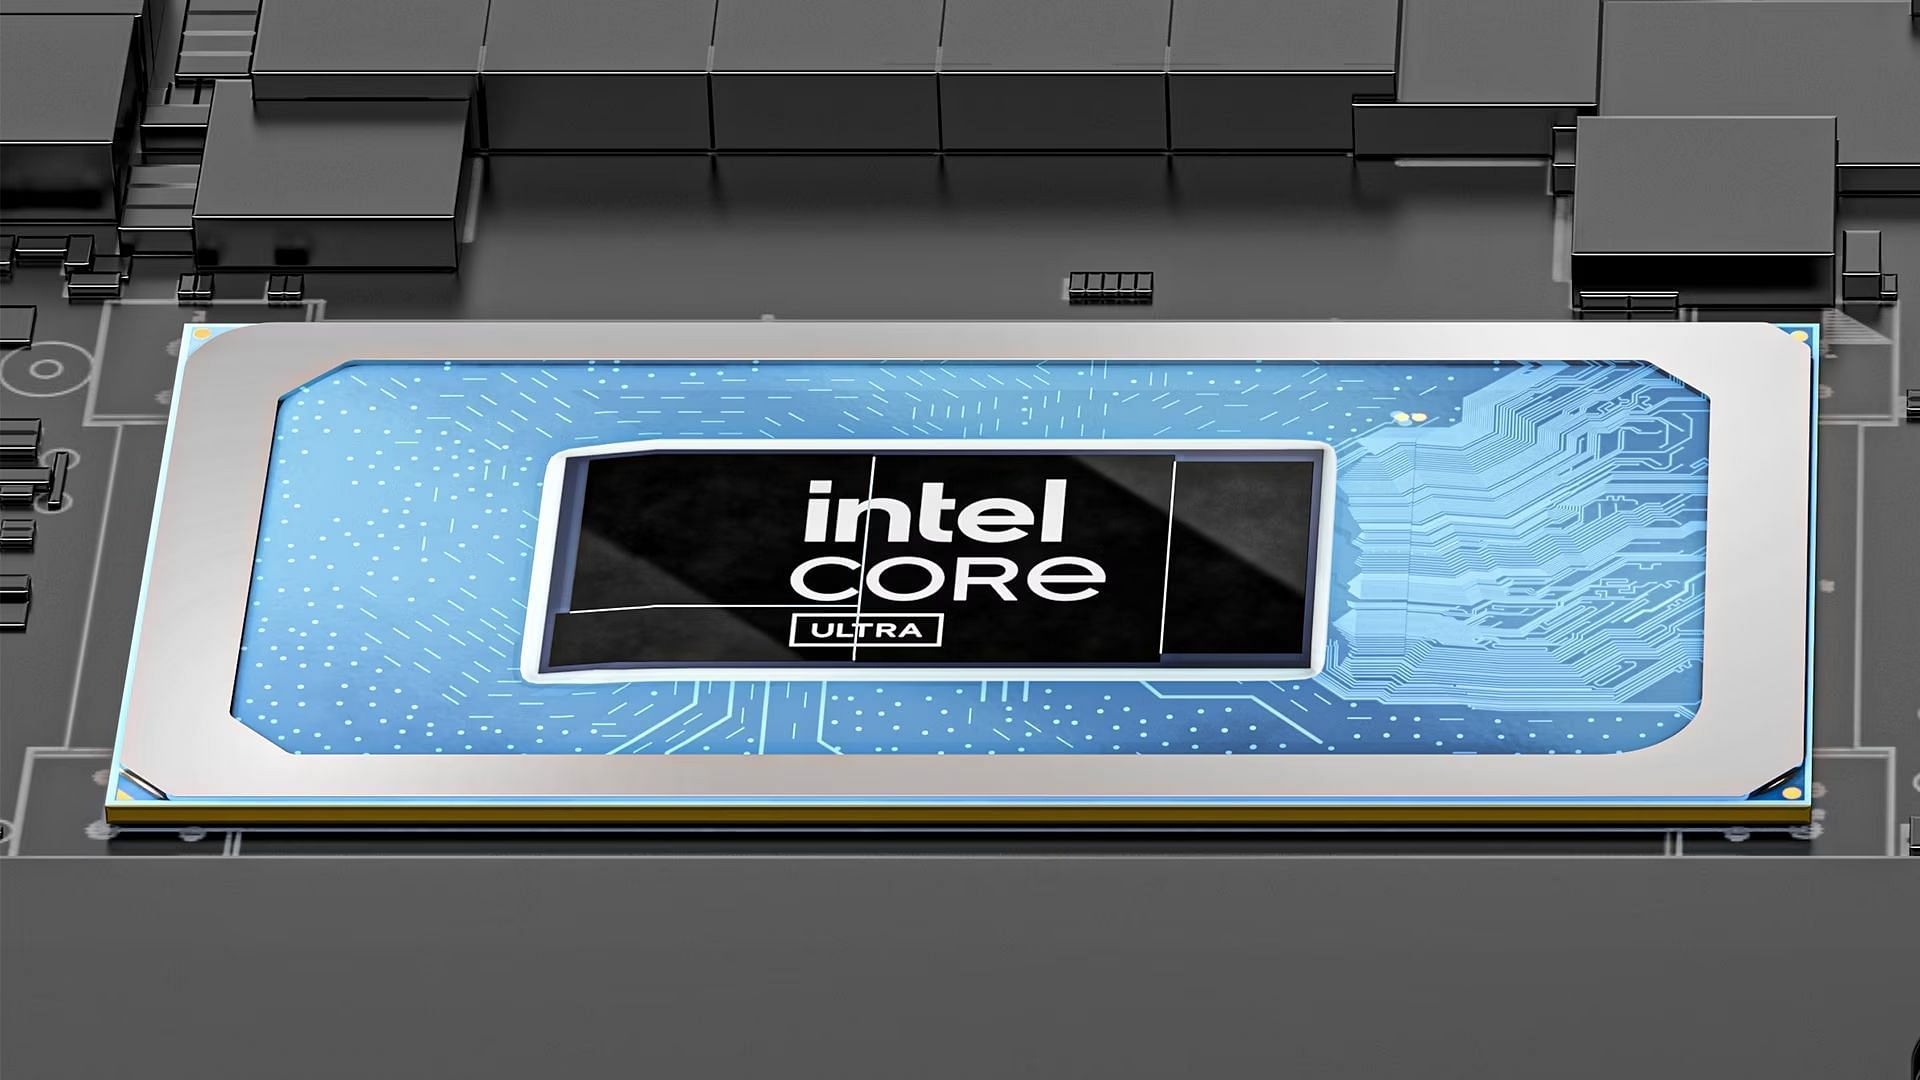 Intel Core Ultra 7 offers better efficiency and temperature control than Intel i7 14th Gen (Image via Dell)